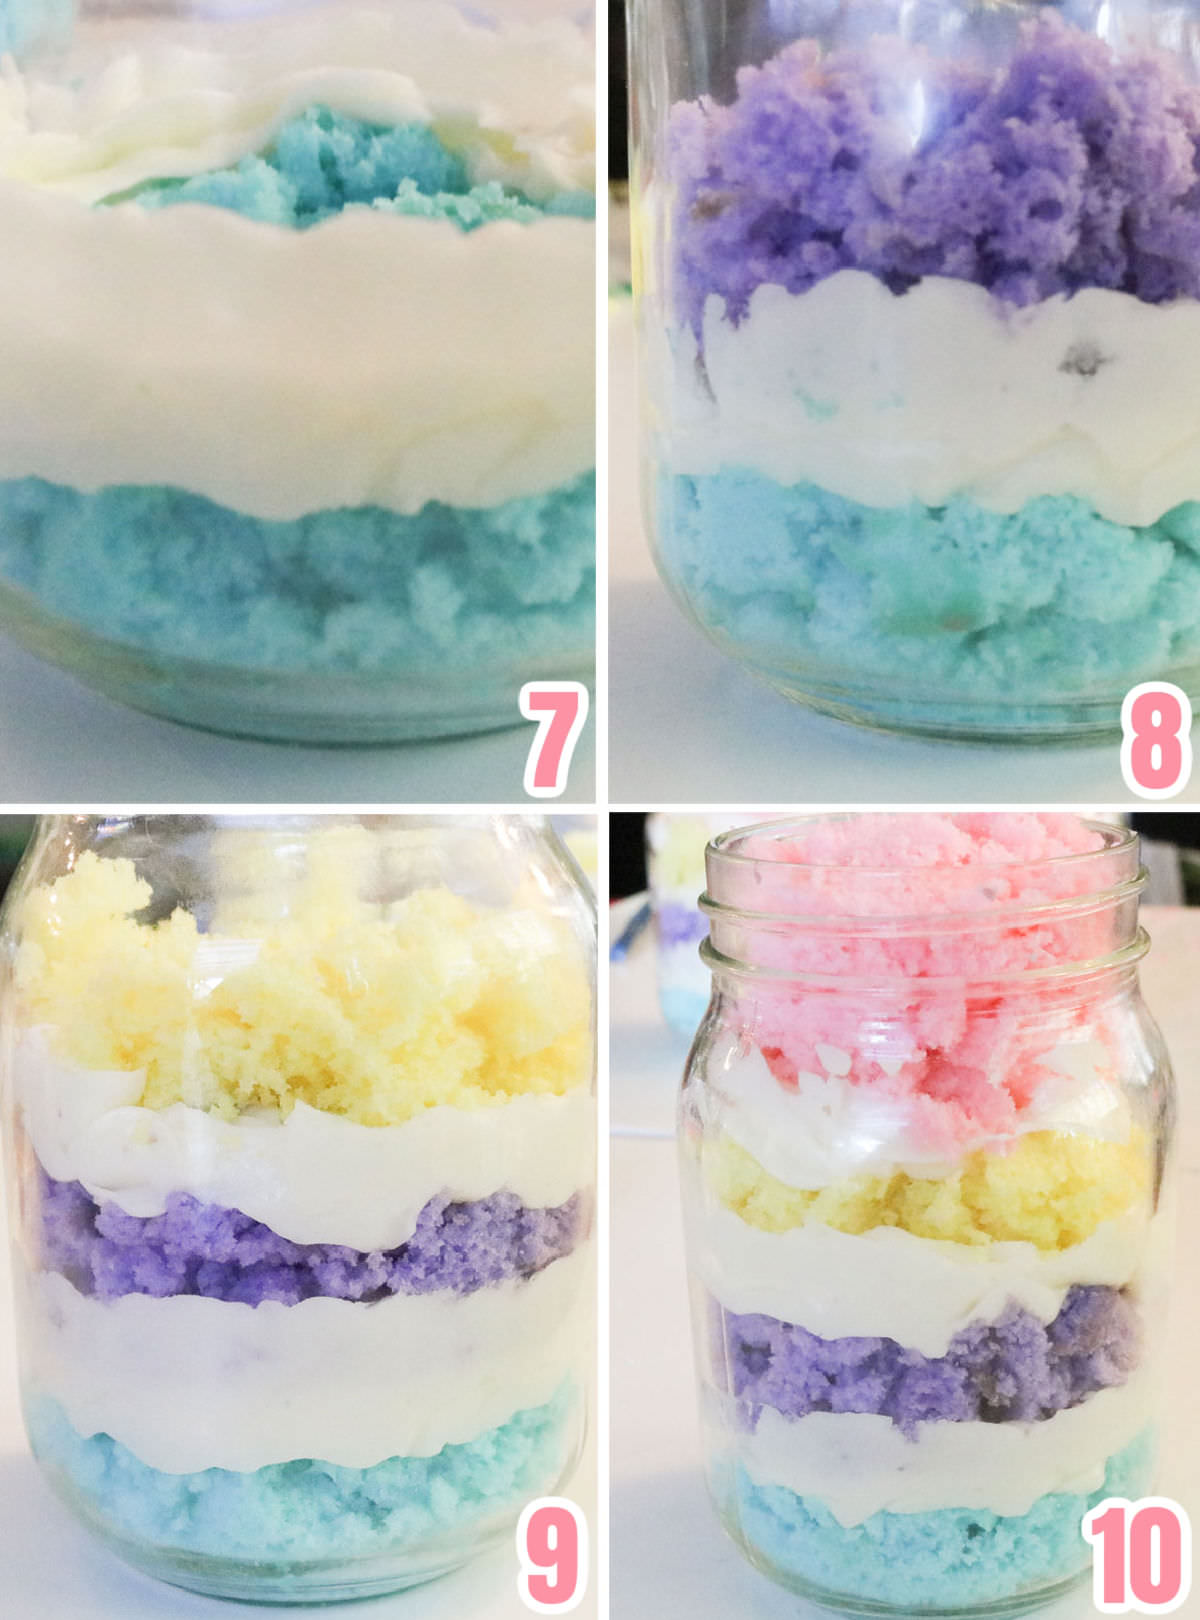 Collage image showing the steps for layering in the cake and frosting into the Cupcake in a Jar.